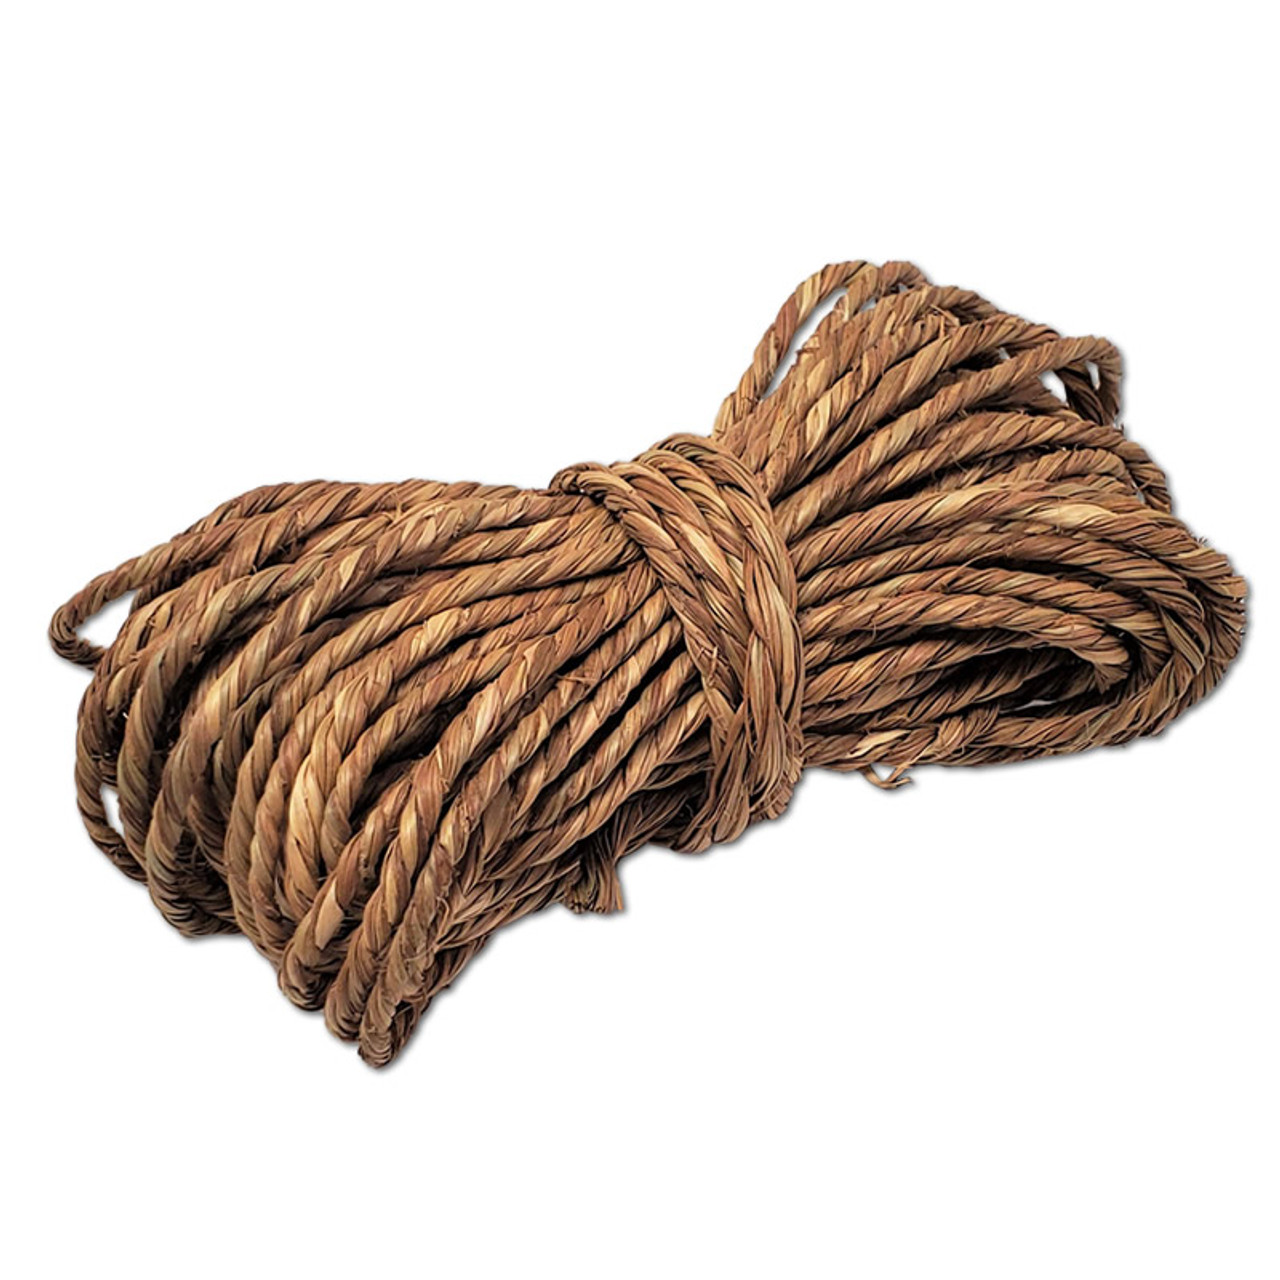 1/8 Twisted Seagrass Rope 50ft